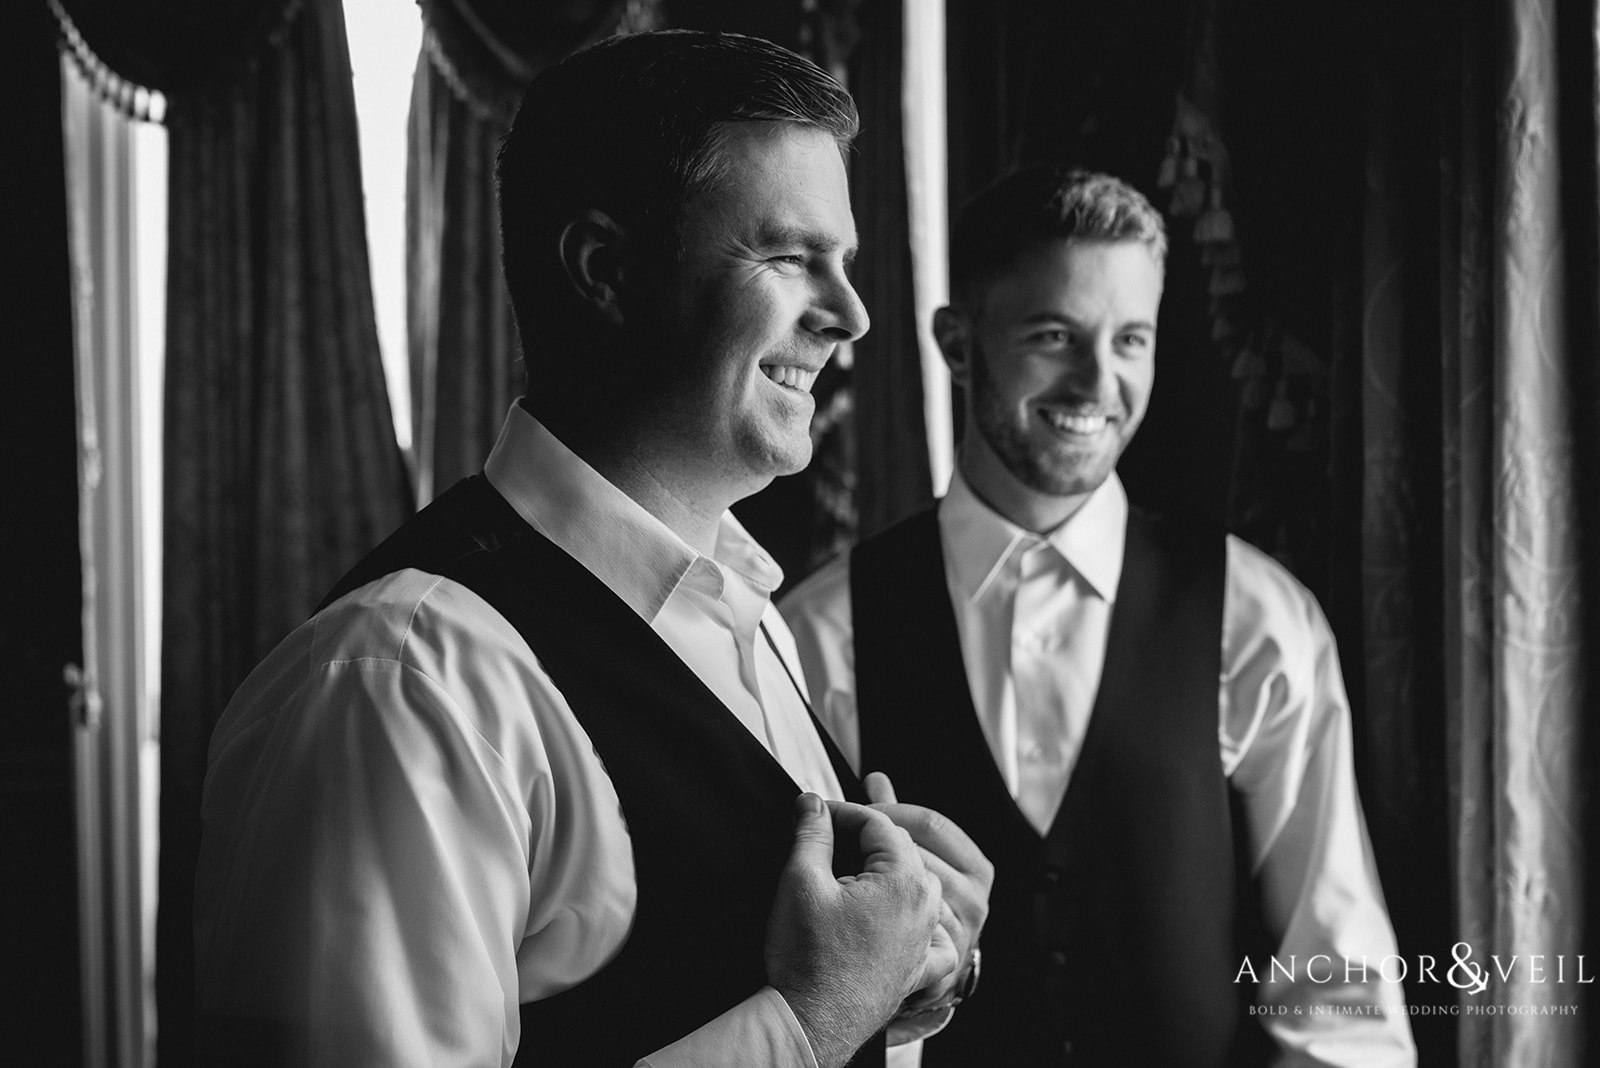 A good laugh for the groom at the Lowndes Grove Plantation Wedding